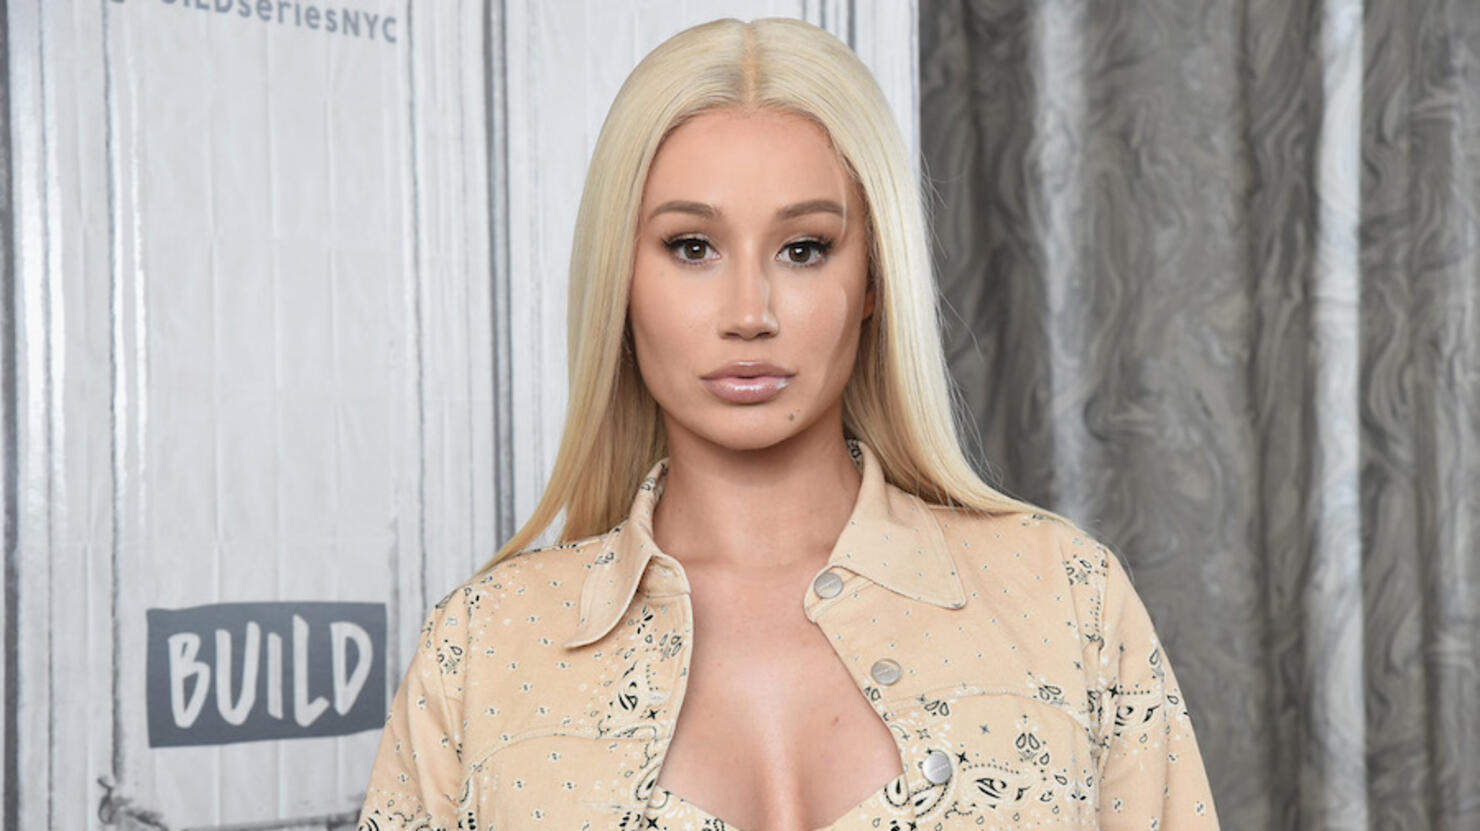 Iggy Azalea Transforms Her Look With New Hair Color | iHeart